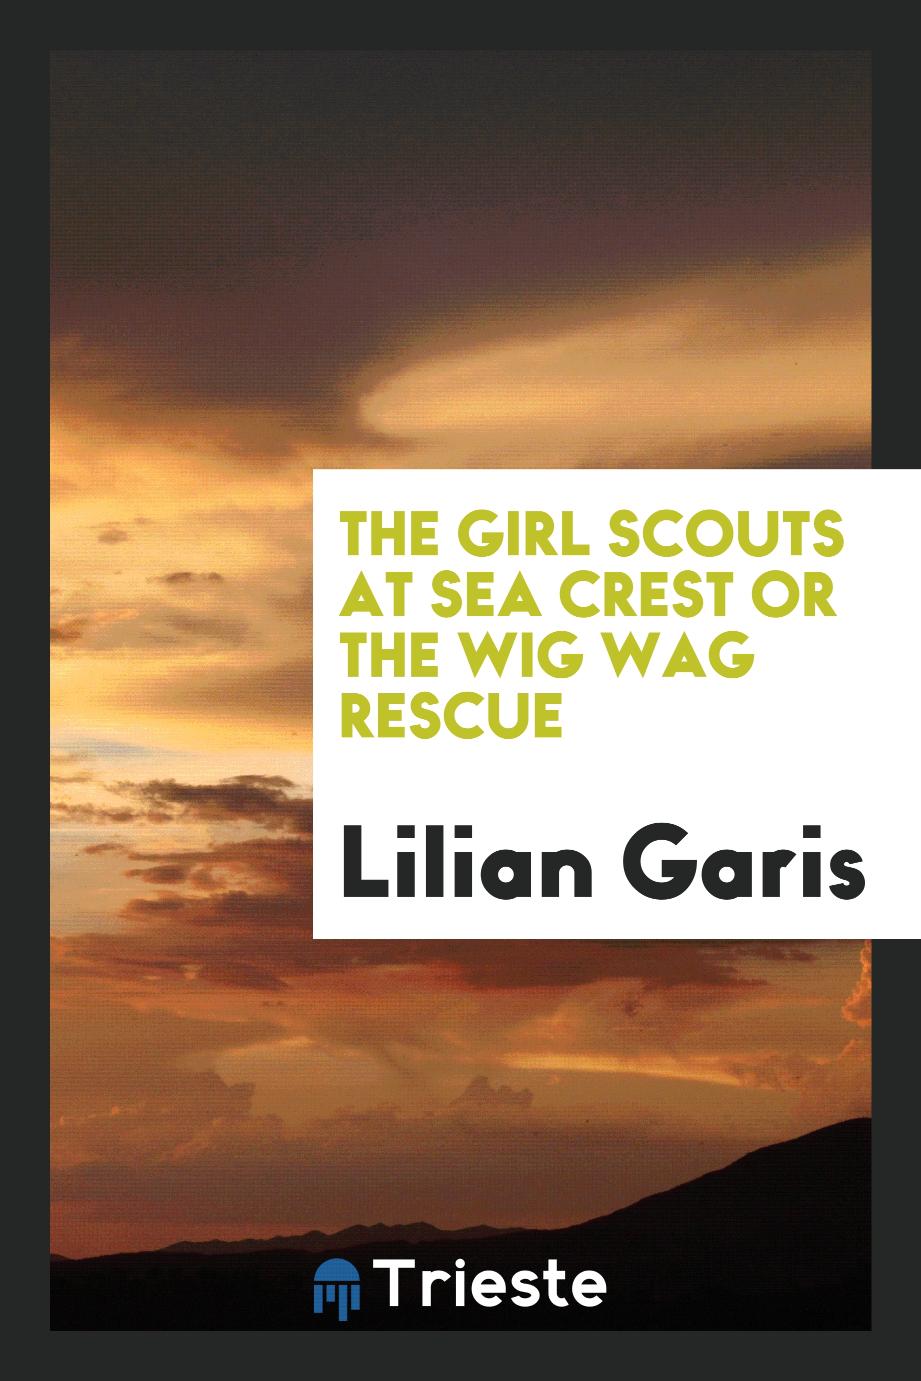 The girl scouts at Sea Crest or the wig wag rescue